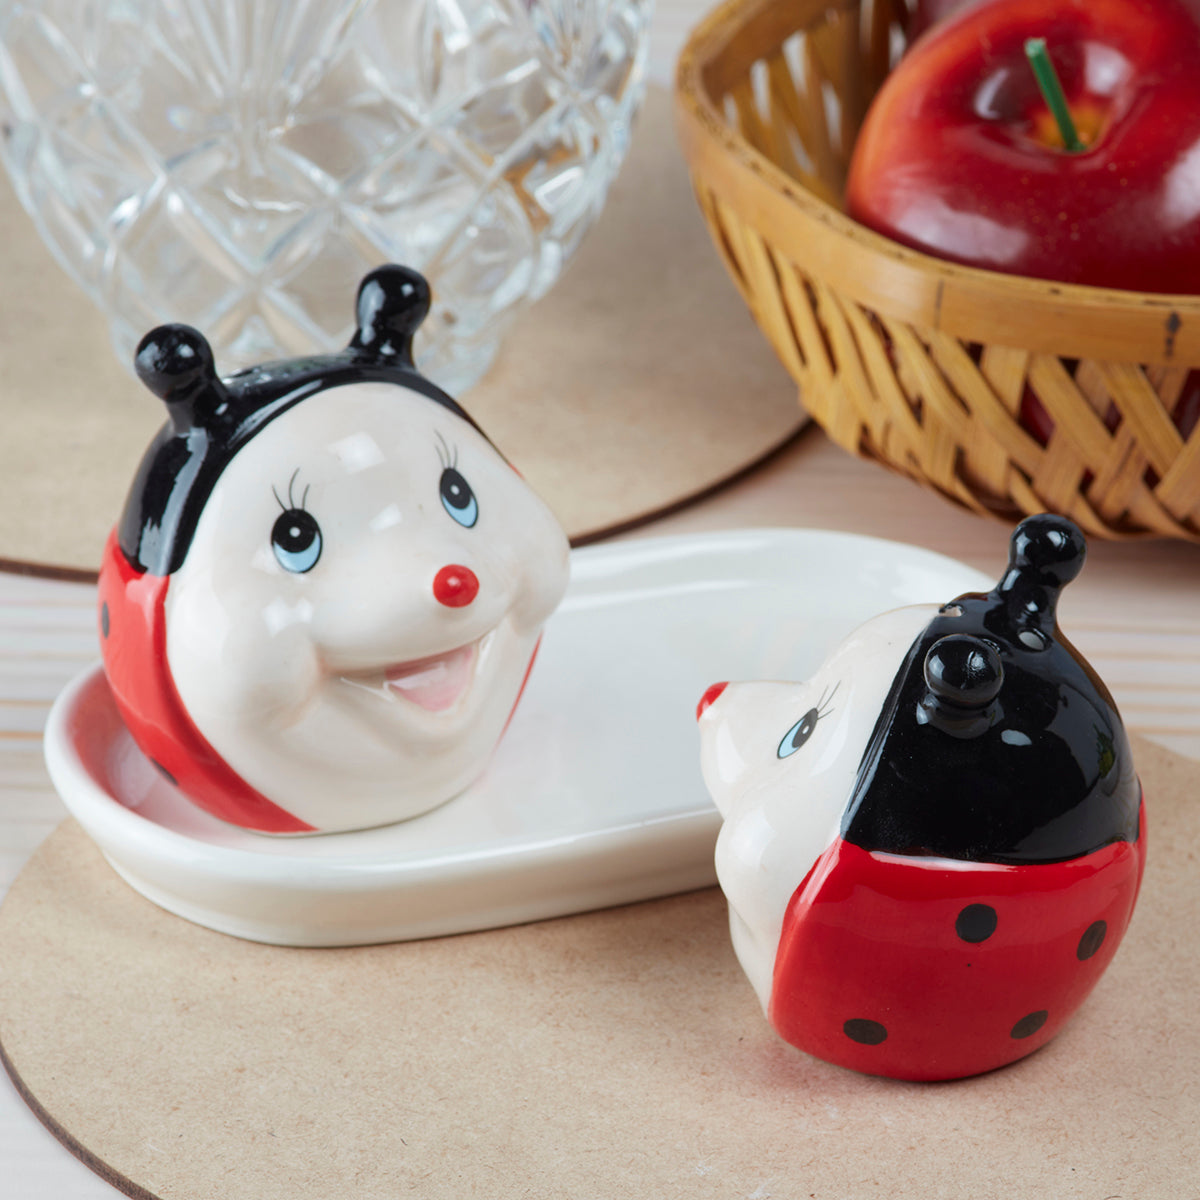 Ceramic Salt and Pepper Set with tray, Lady Bug Design, Red Black (8568)